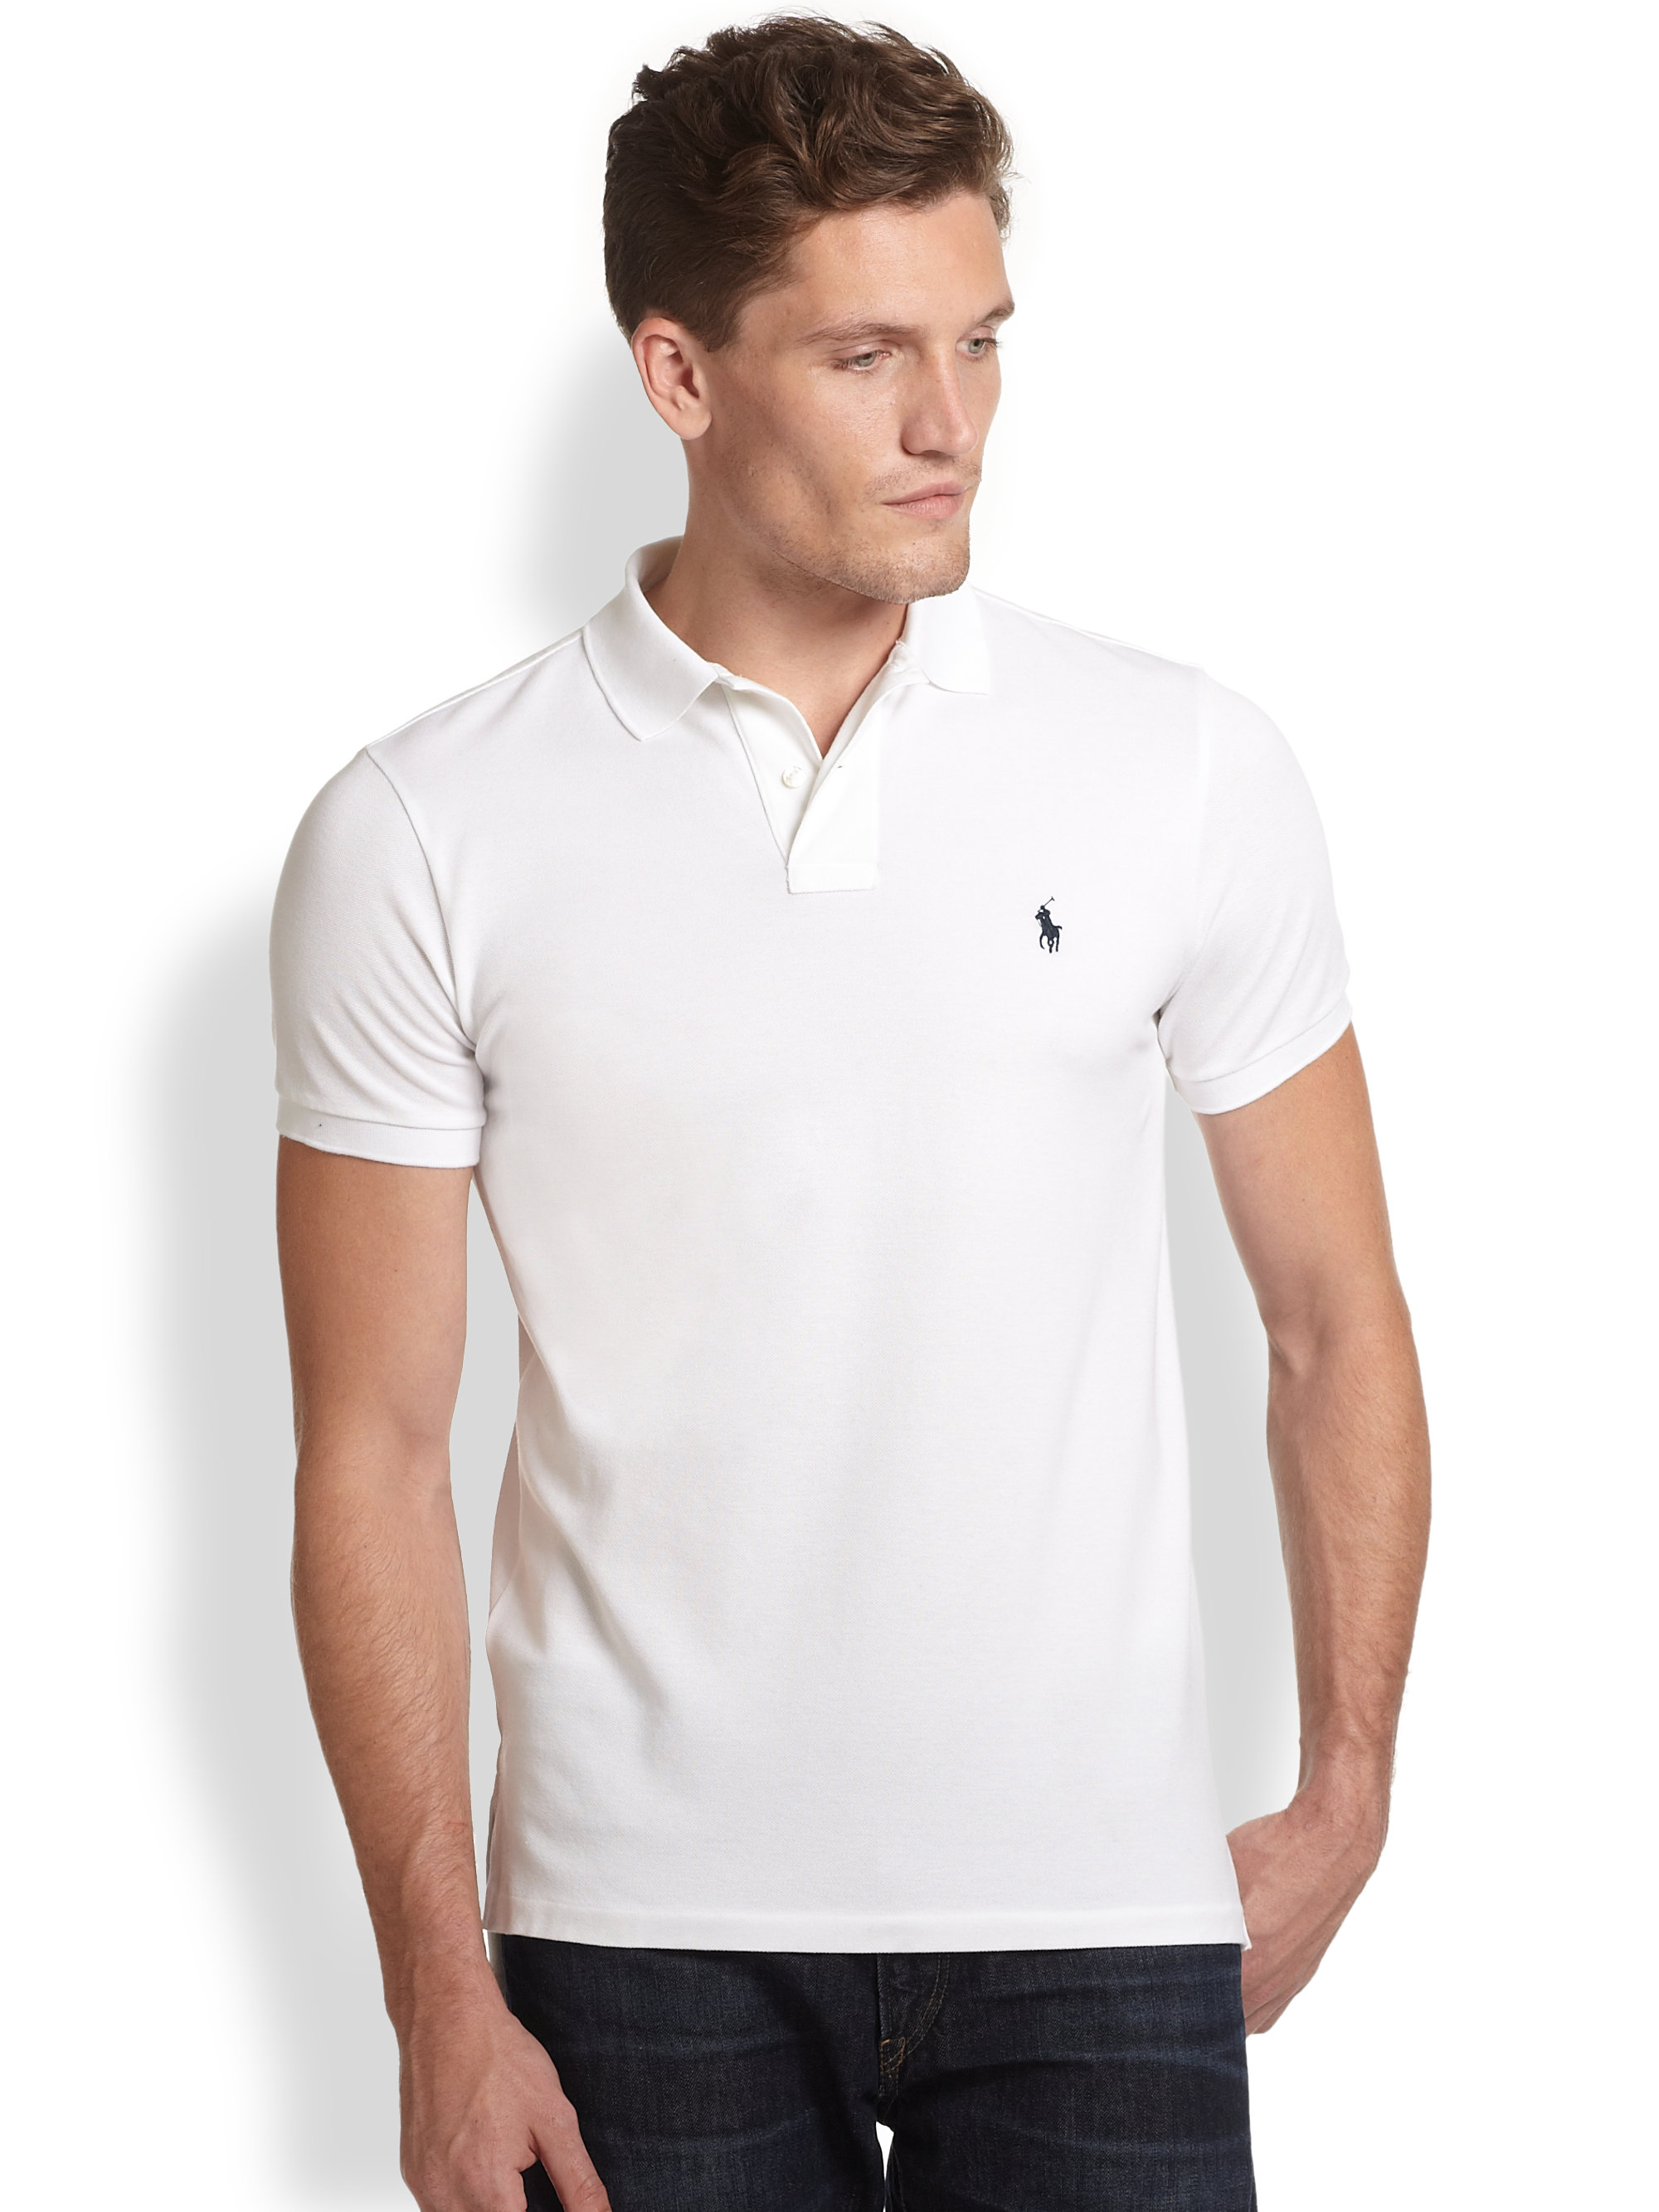  Polo ralph lauren  Custom fit Cotton Mesh Polo  in White for 